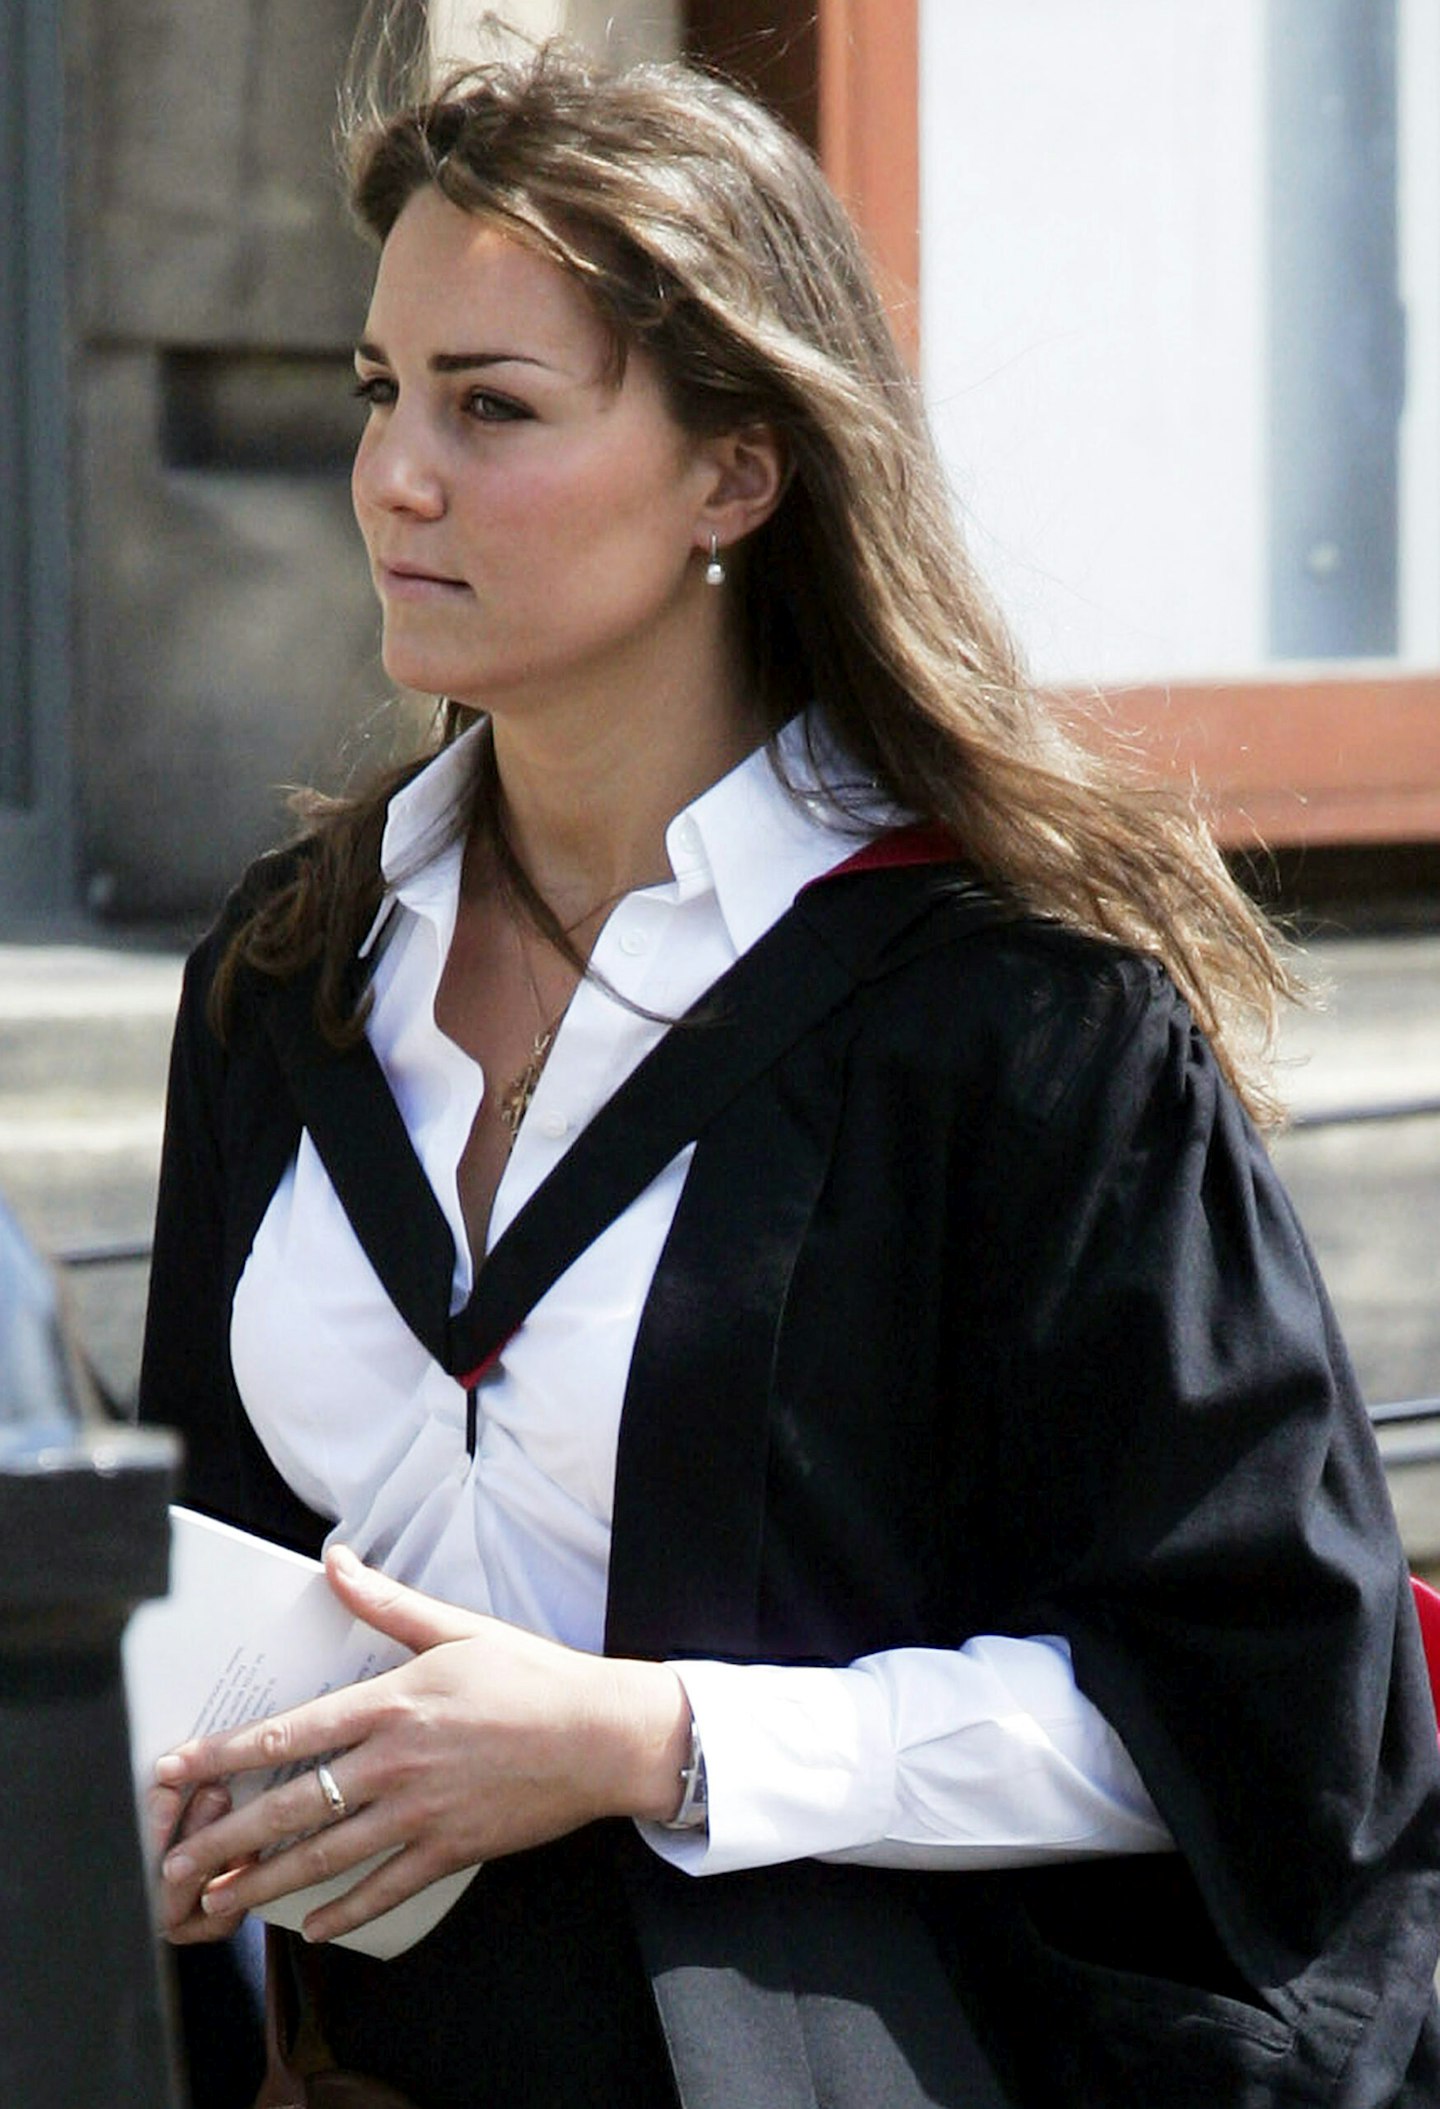 New graduate Kate Middleton wears a traditional gown to the graduation ceremony at St Andrew's University to collect her degree in St Andrew's on June 23, 2005